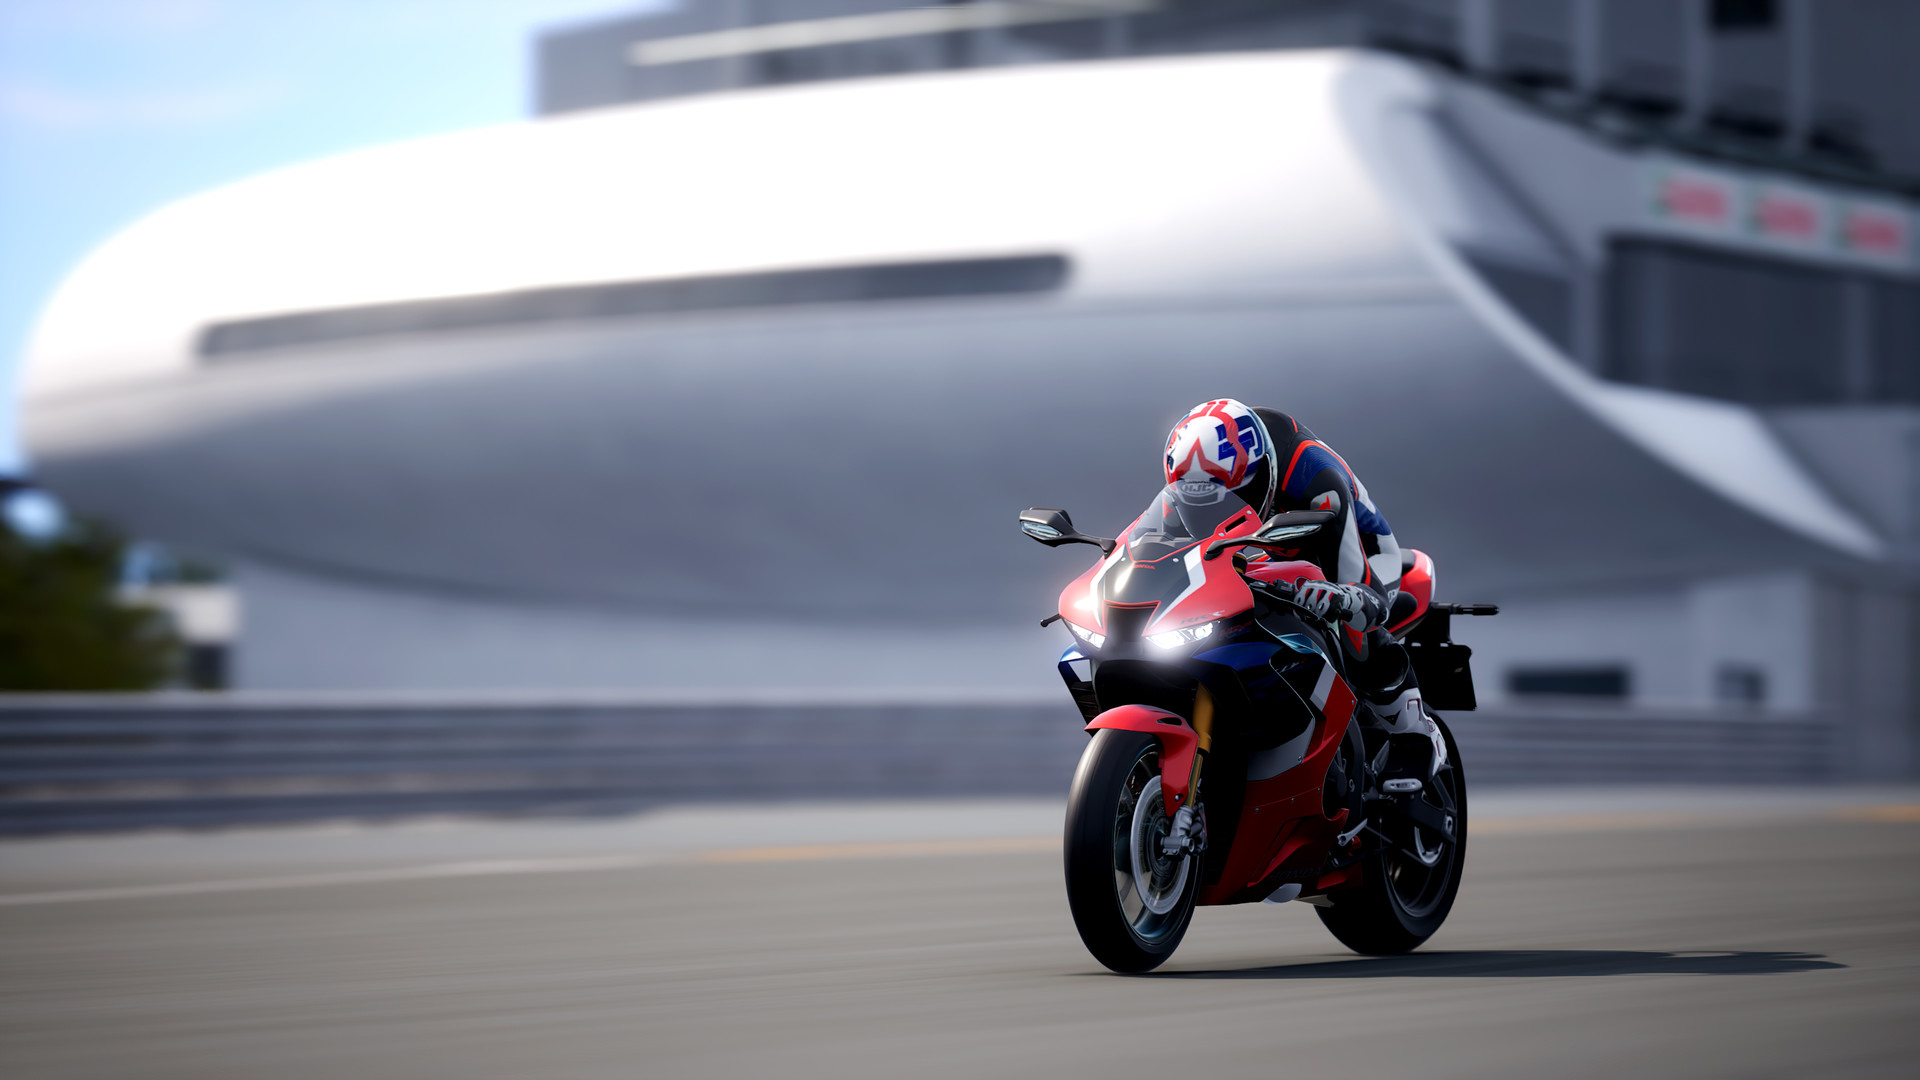 RIDE 4 - Extreme Performance Featured Screenshot #1